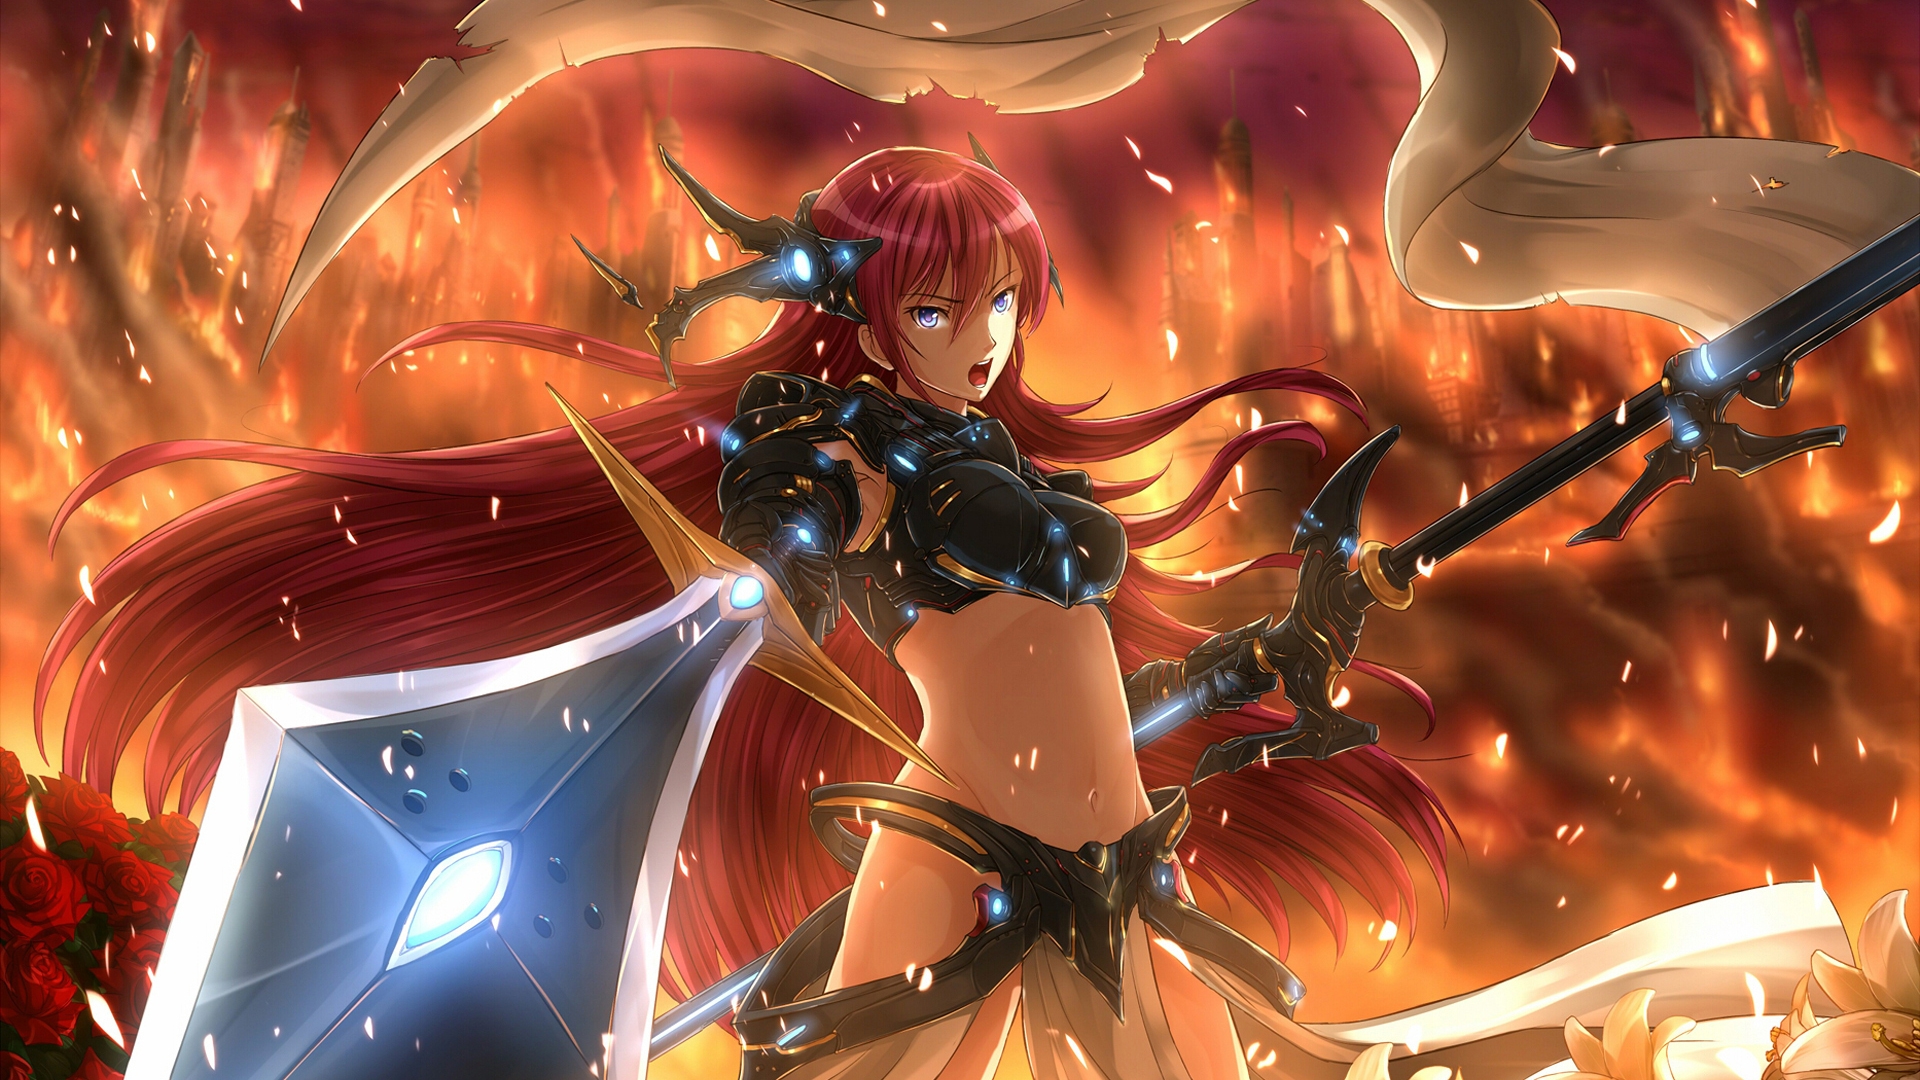 Megurine Luka in Fire for 1920 x 1080 HDTV 1080p resolution